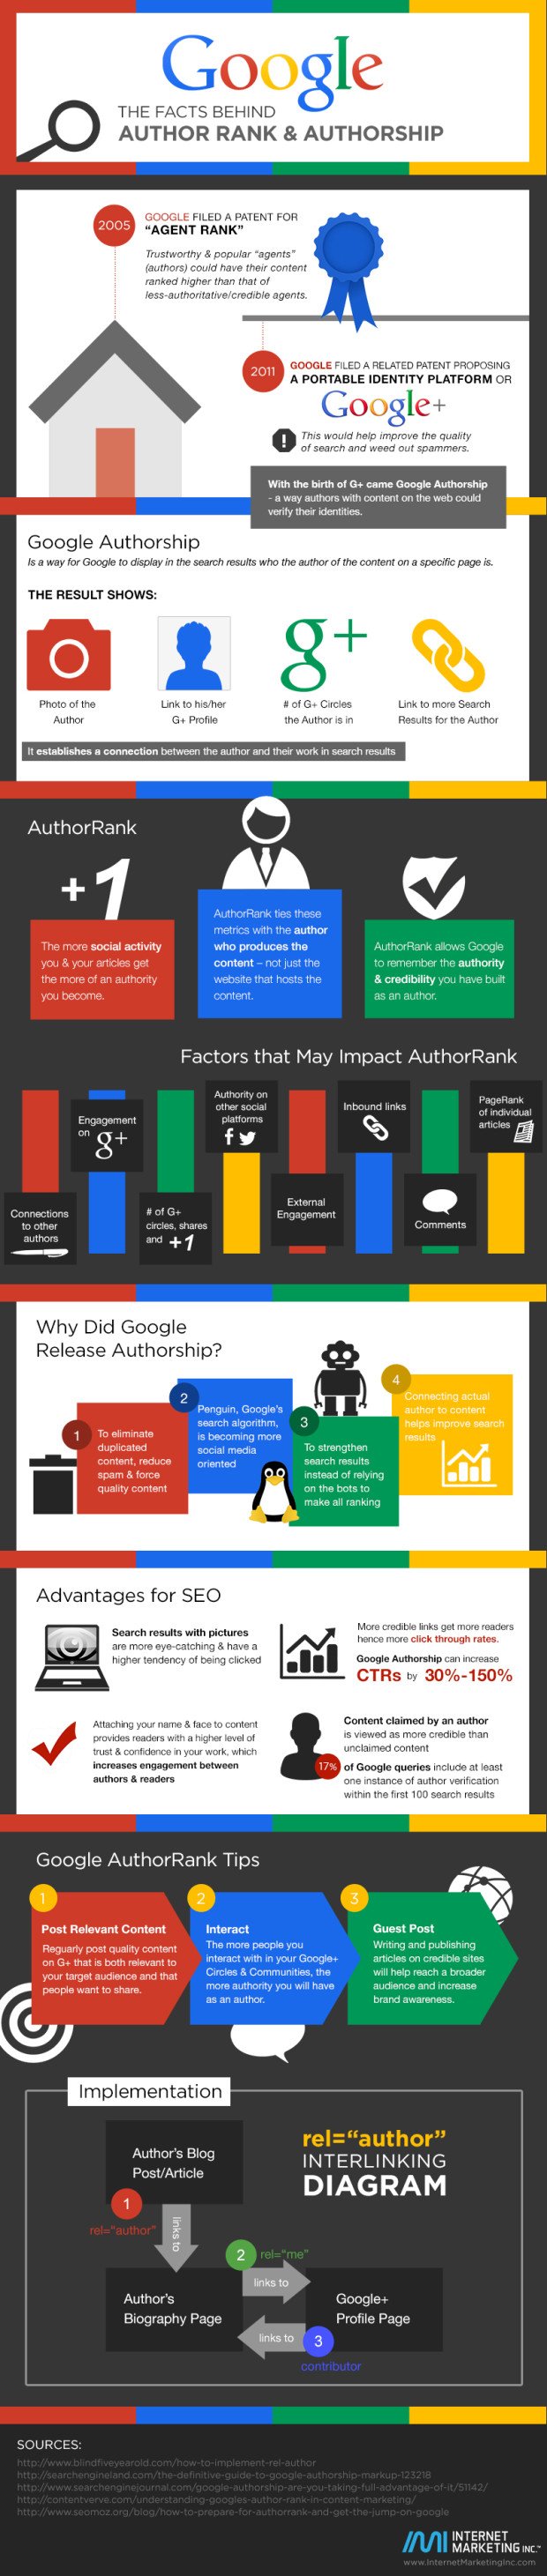 facts-behind-google-author-rank-authoship-infographic